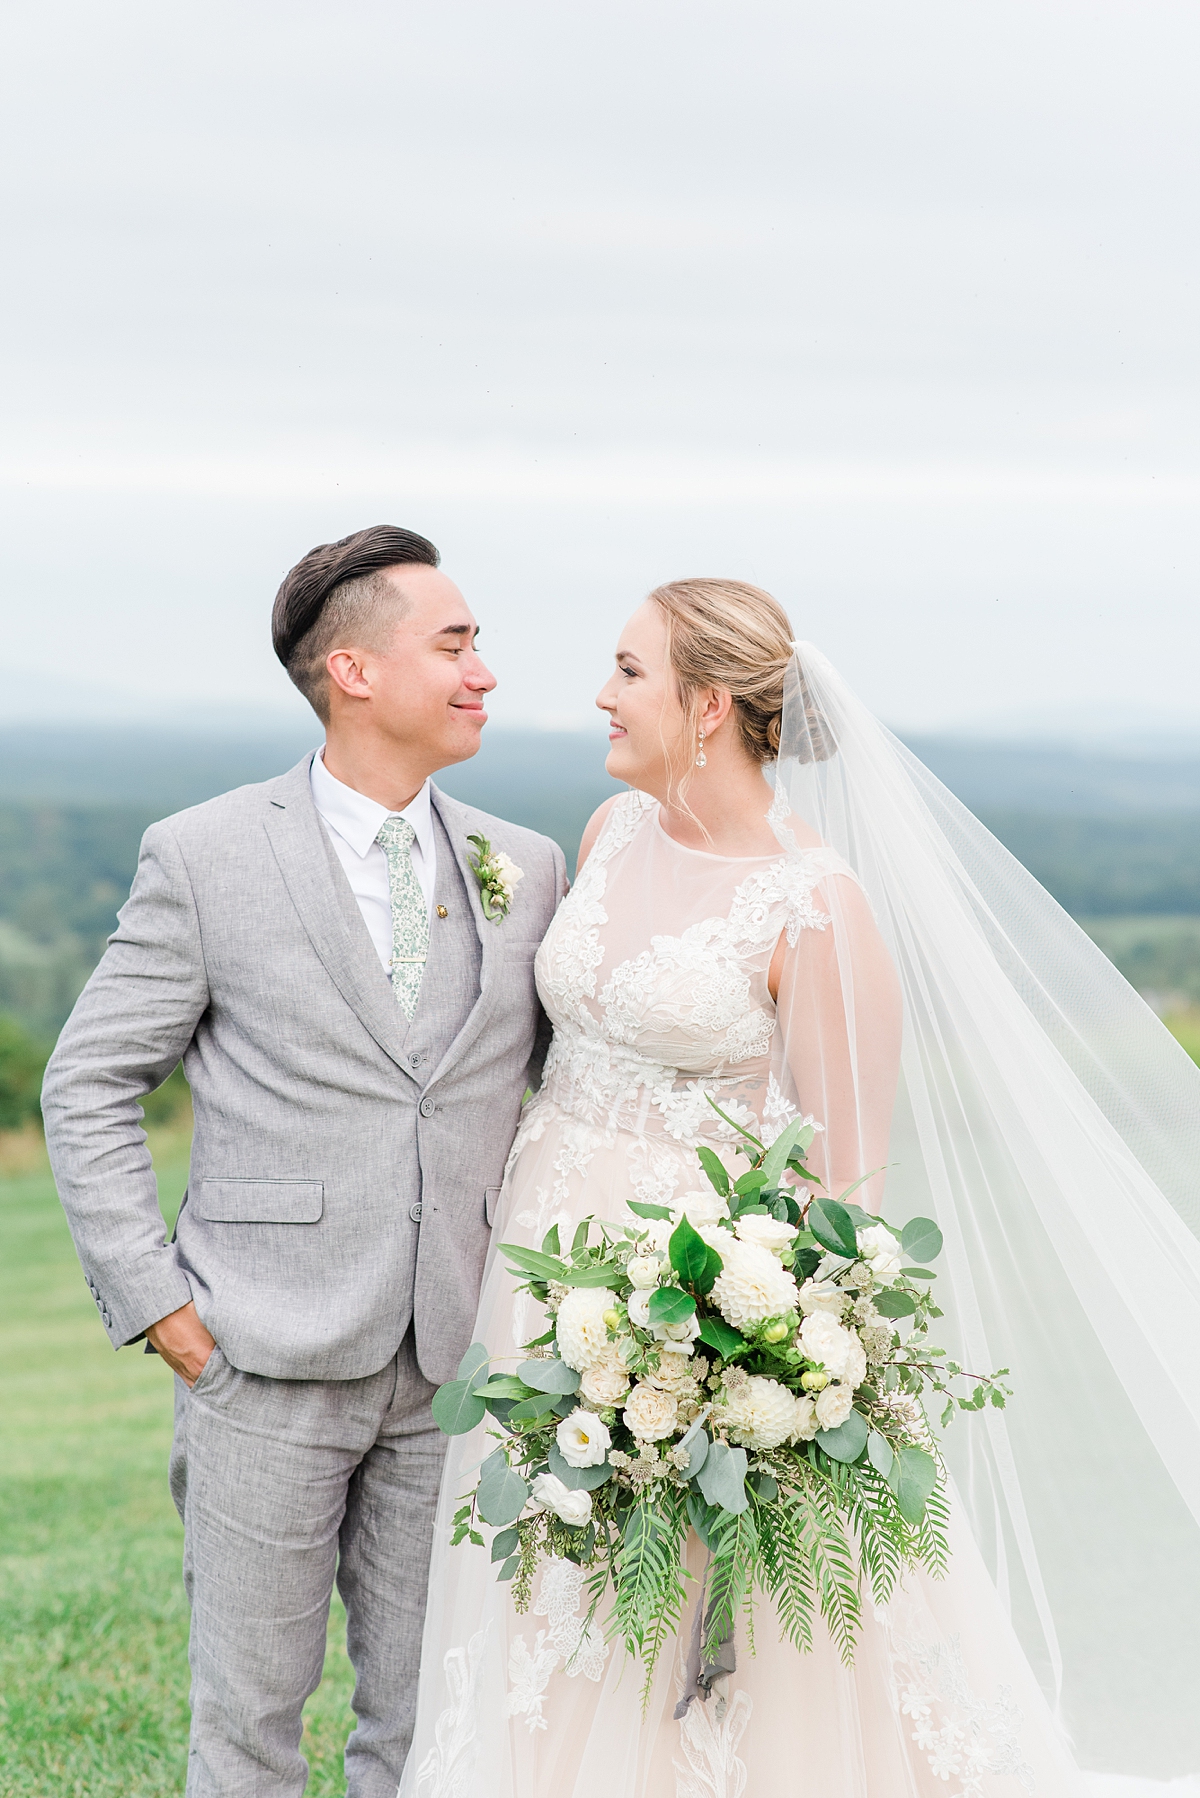 Bride and Groom Portraits with Veil and Mountain View at a Timeless Grace Estate Winery Wedding. Wedding Photography by Charlottesville Wedding Photographer Kailey Brianne Photography.